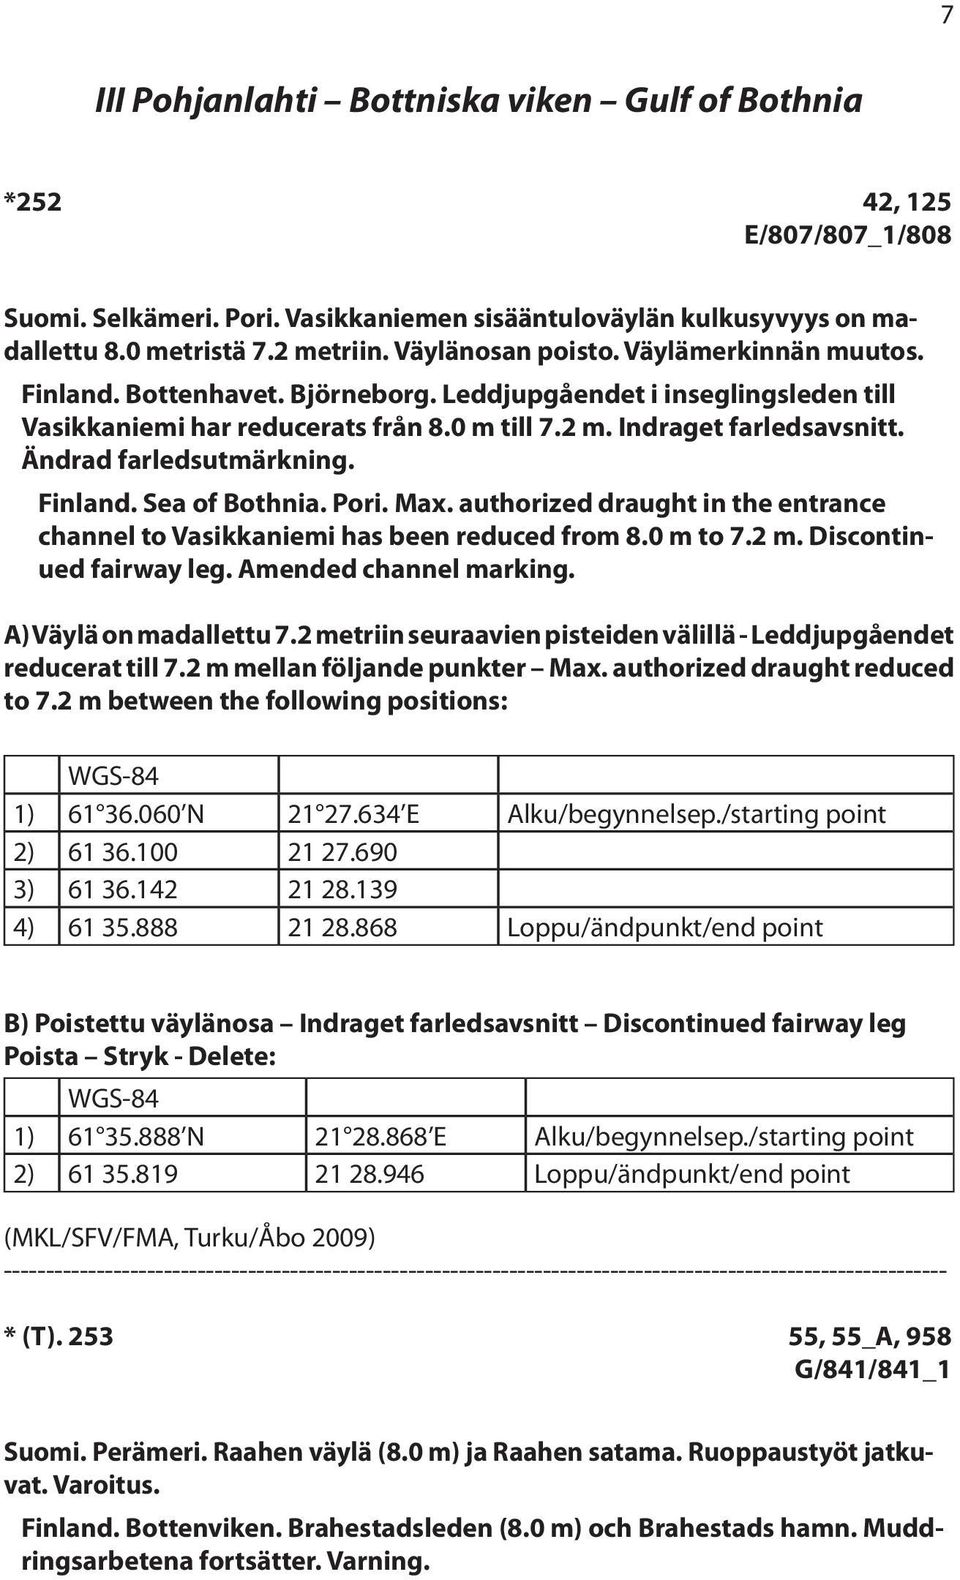 Ändrad farledsutmärkning. Finland. Sea of Bothnia. Pori. Max. authorized draught in the entrance channel to Vasikkaniemi has been reduced from 8.0 m to 7.2 m. Discontinued fairway leg.